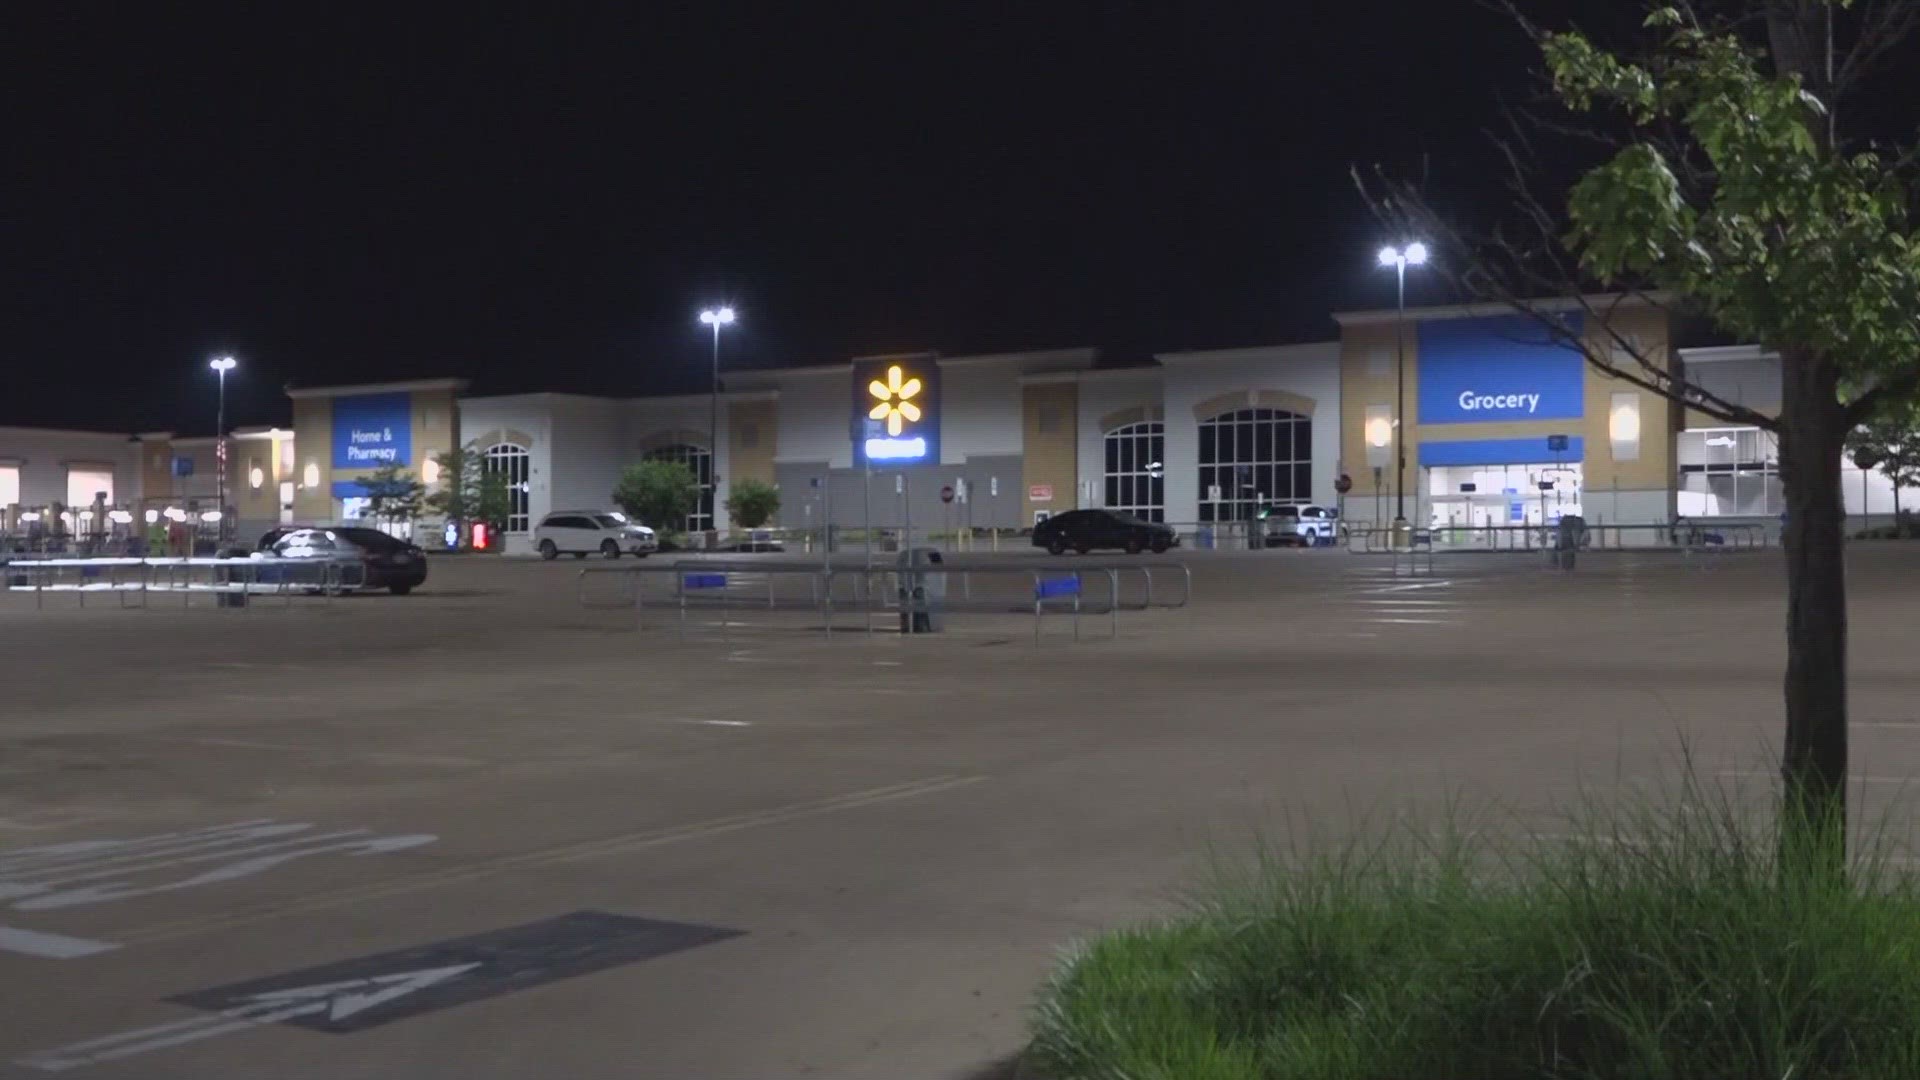 Police said the car break-ins happened just after 2 a.m. Tuesday at the Walmart on Highland Boulevard Drive. It's unknown how many vehicles were broken into.